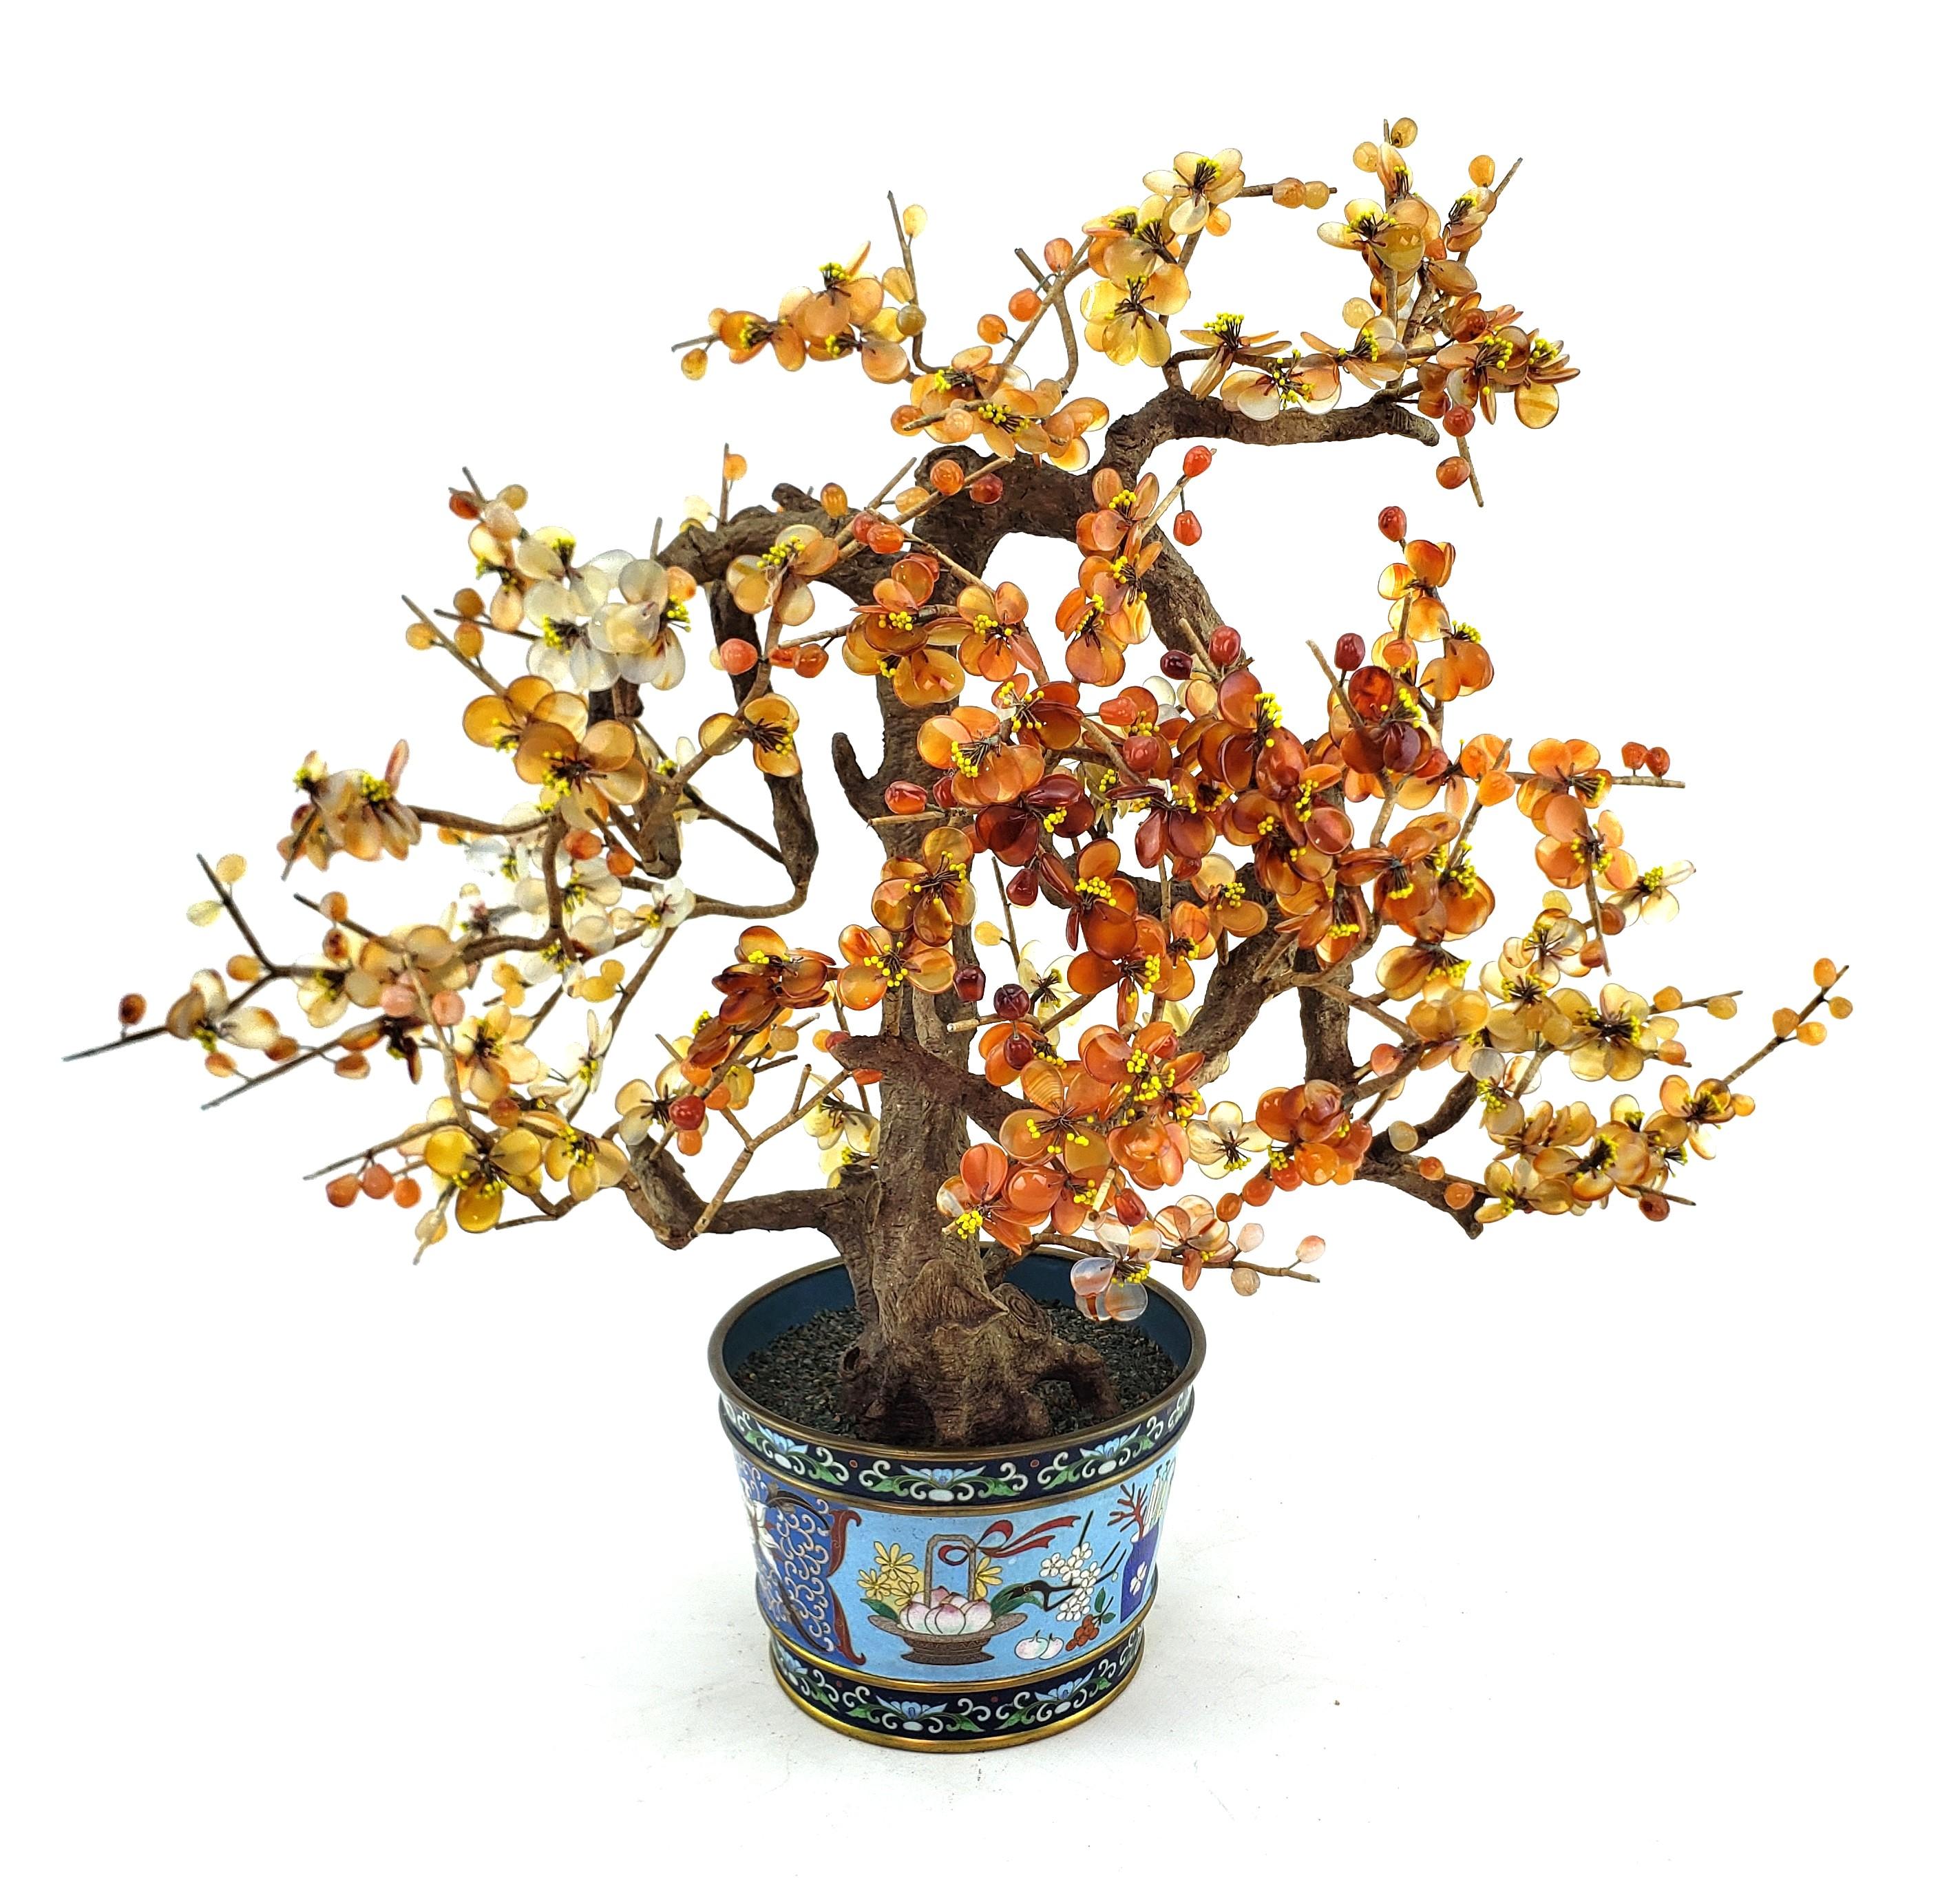 Chinese Export Antique Chinese Bonzai Styled Flowering Fruit Tree Sculpture with Cloisonne Pot For Sale